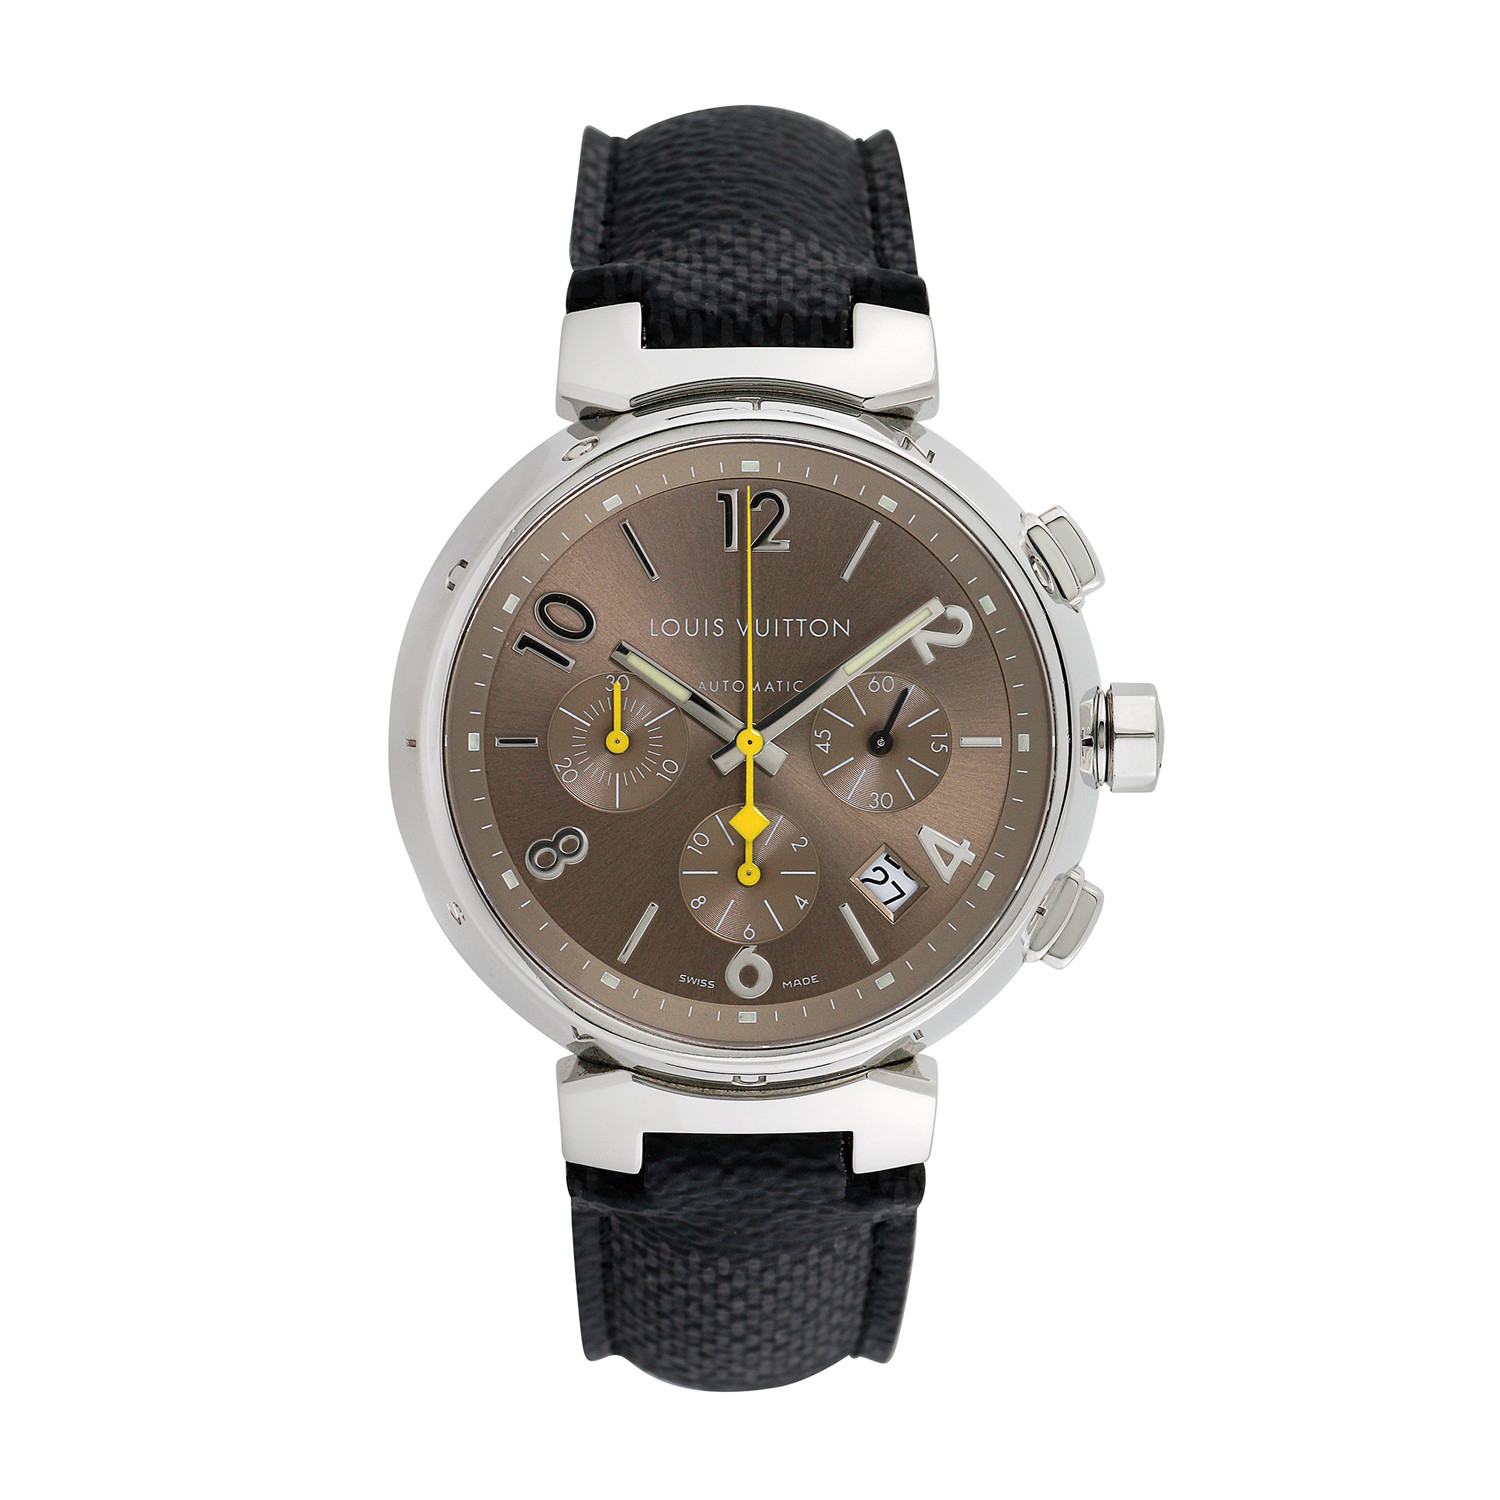 Louis Vuitton - Tambour Stainless Steel Leather Strap Automatic Watch